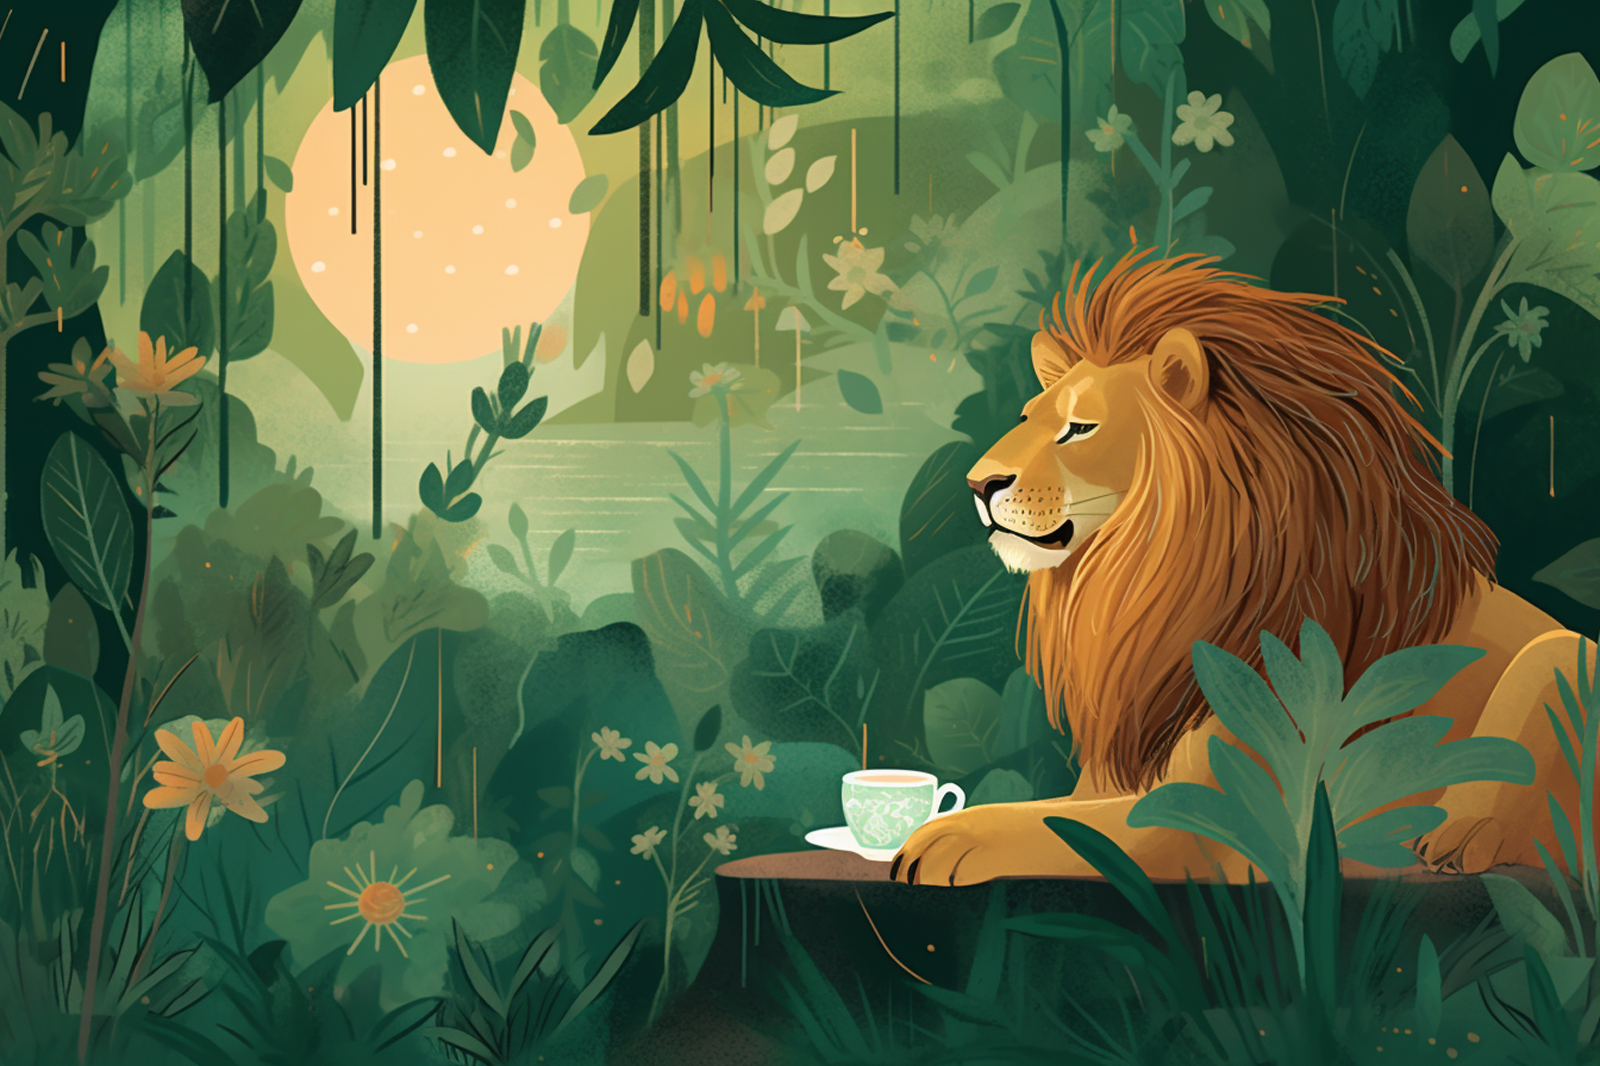 A painting of a lion sitting in the jungle with a cup and plate in front of it